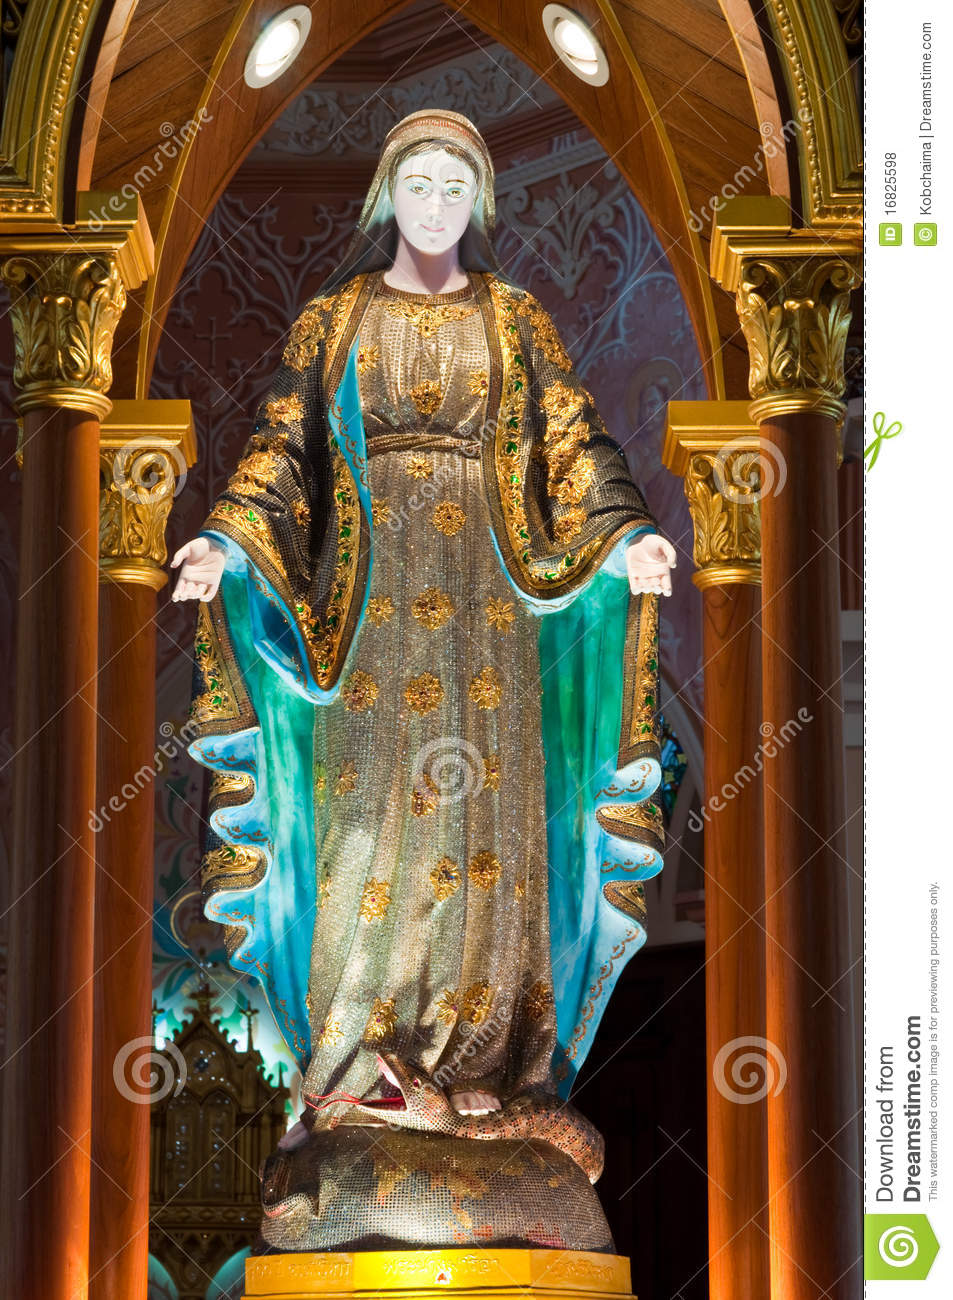 Virgin Mary Statue In The Church Royalty Free Stock Photos   Image